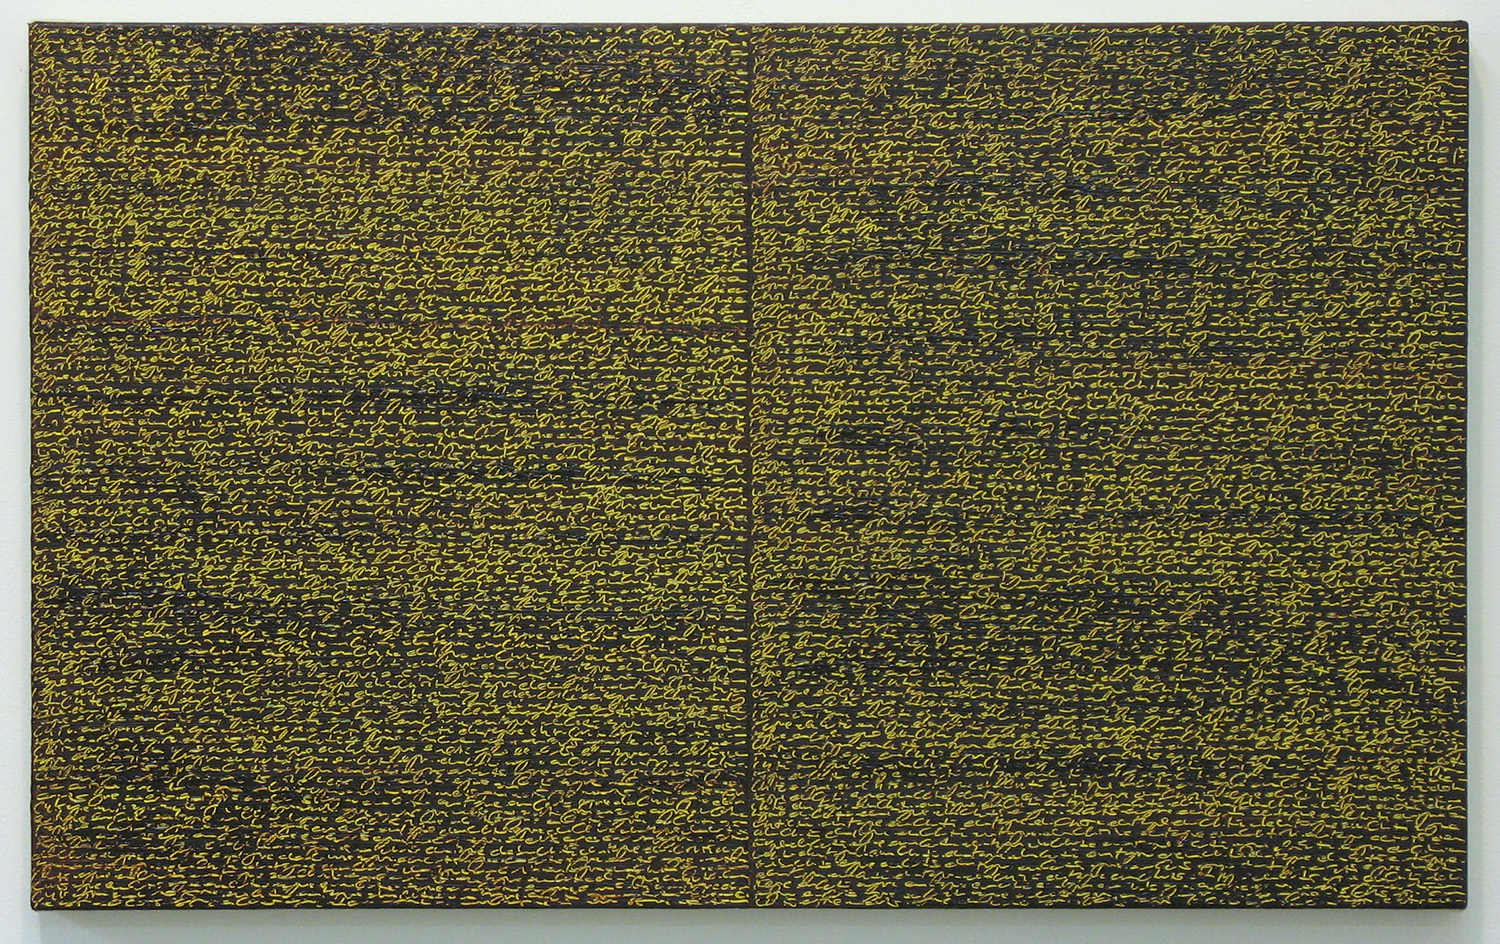 Open Book -yellow-brown-<br>oil and amber on canvas over panel, 37 x 60 cm, 2008